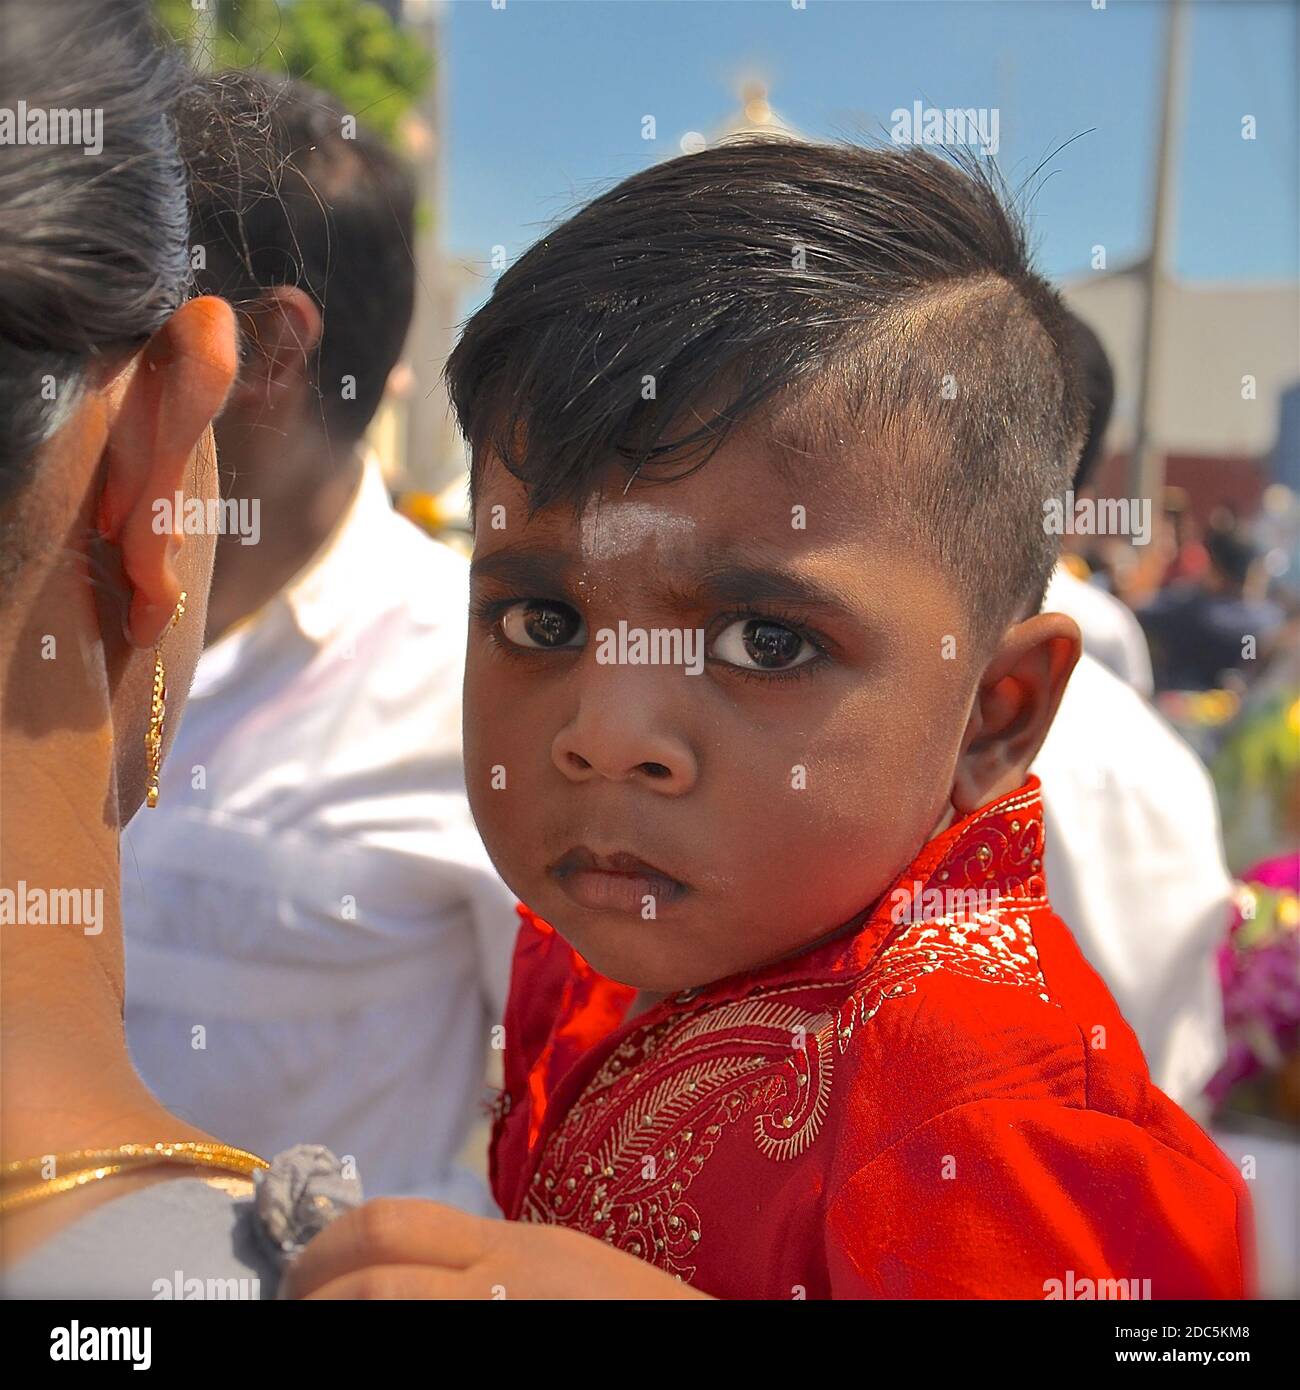 Close up portrait of a young hindu boy with a white bindi, being carried in a parade by his mother. Stock Photo